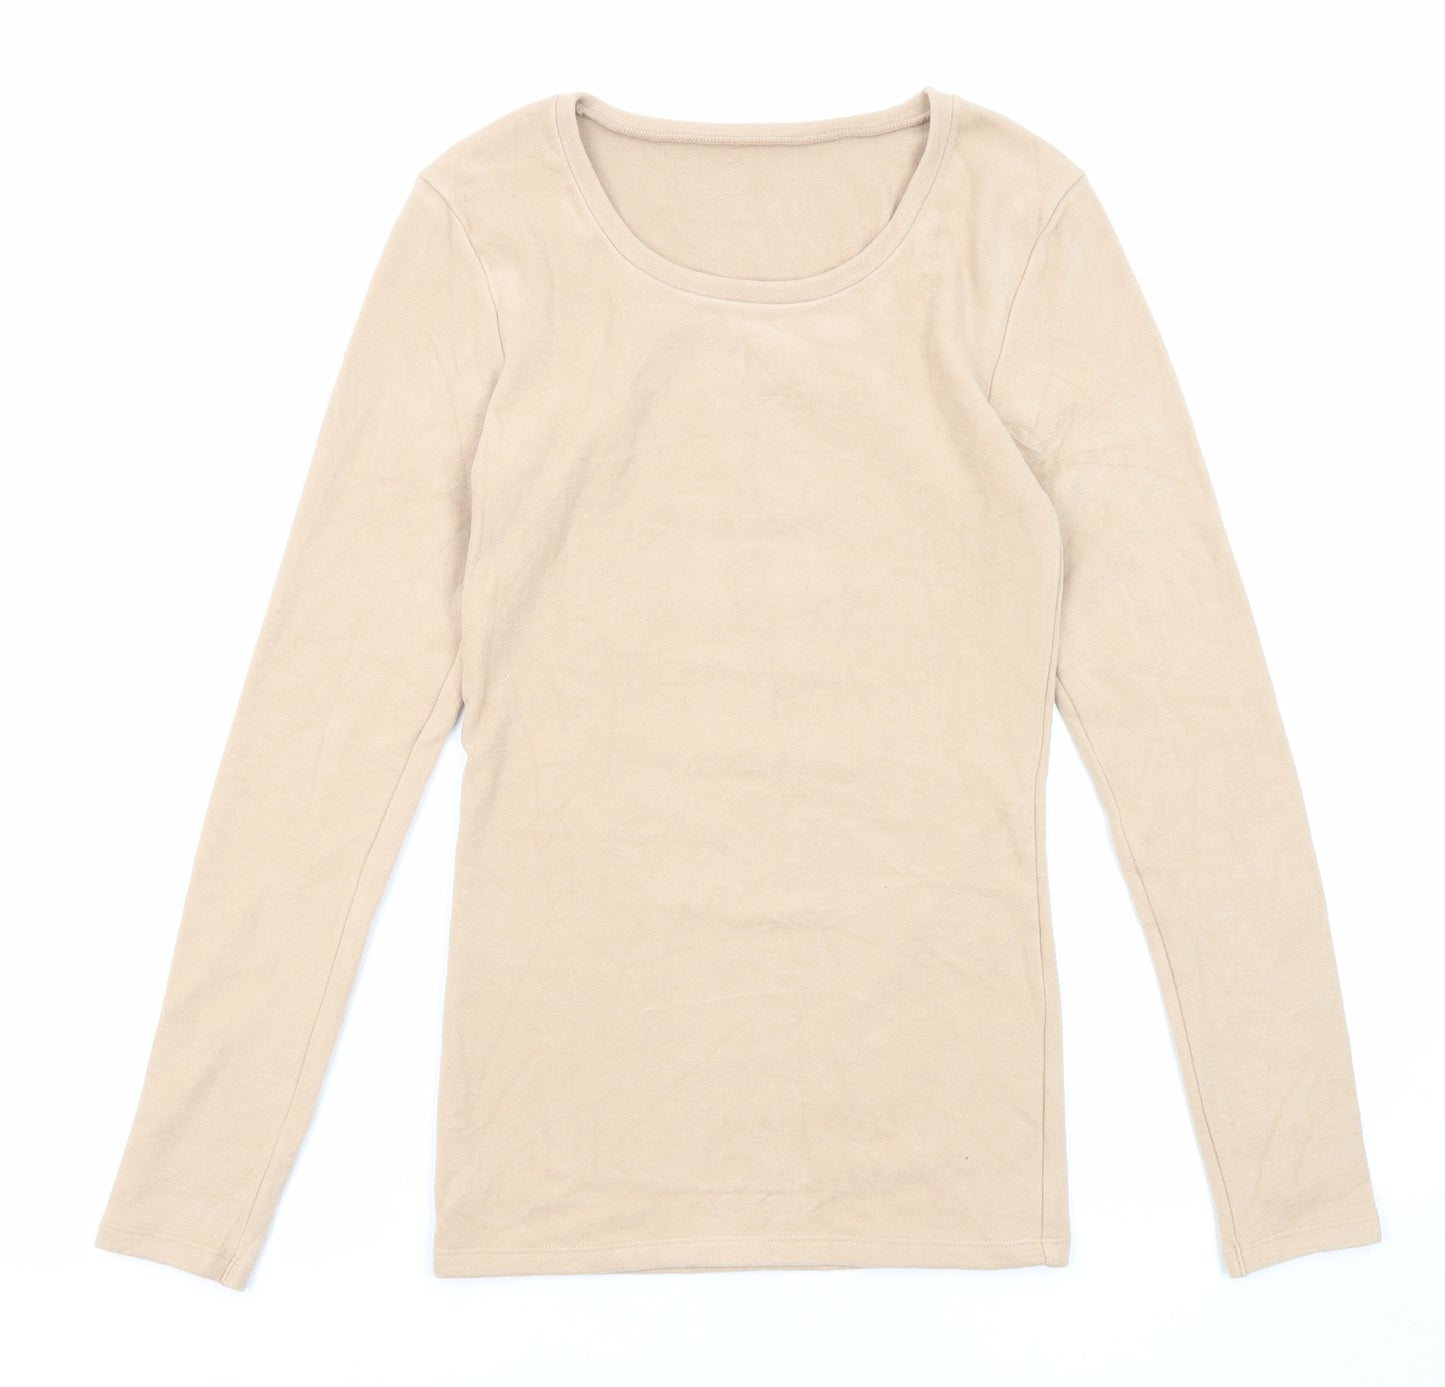 Marks and Spencer Womens Beige Acrylic Basic T-Shirt Size 8 Round Neck - Thermal